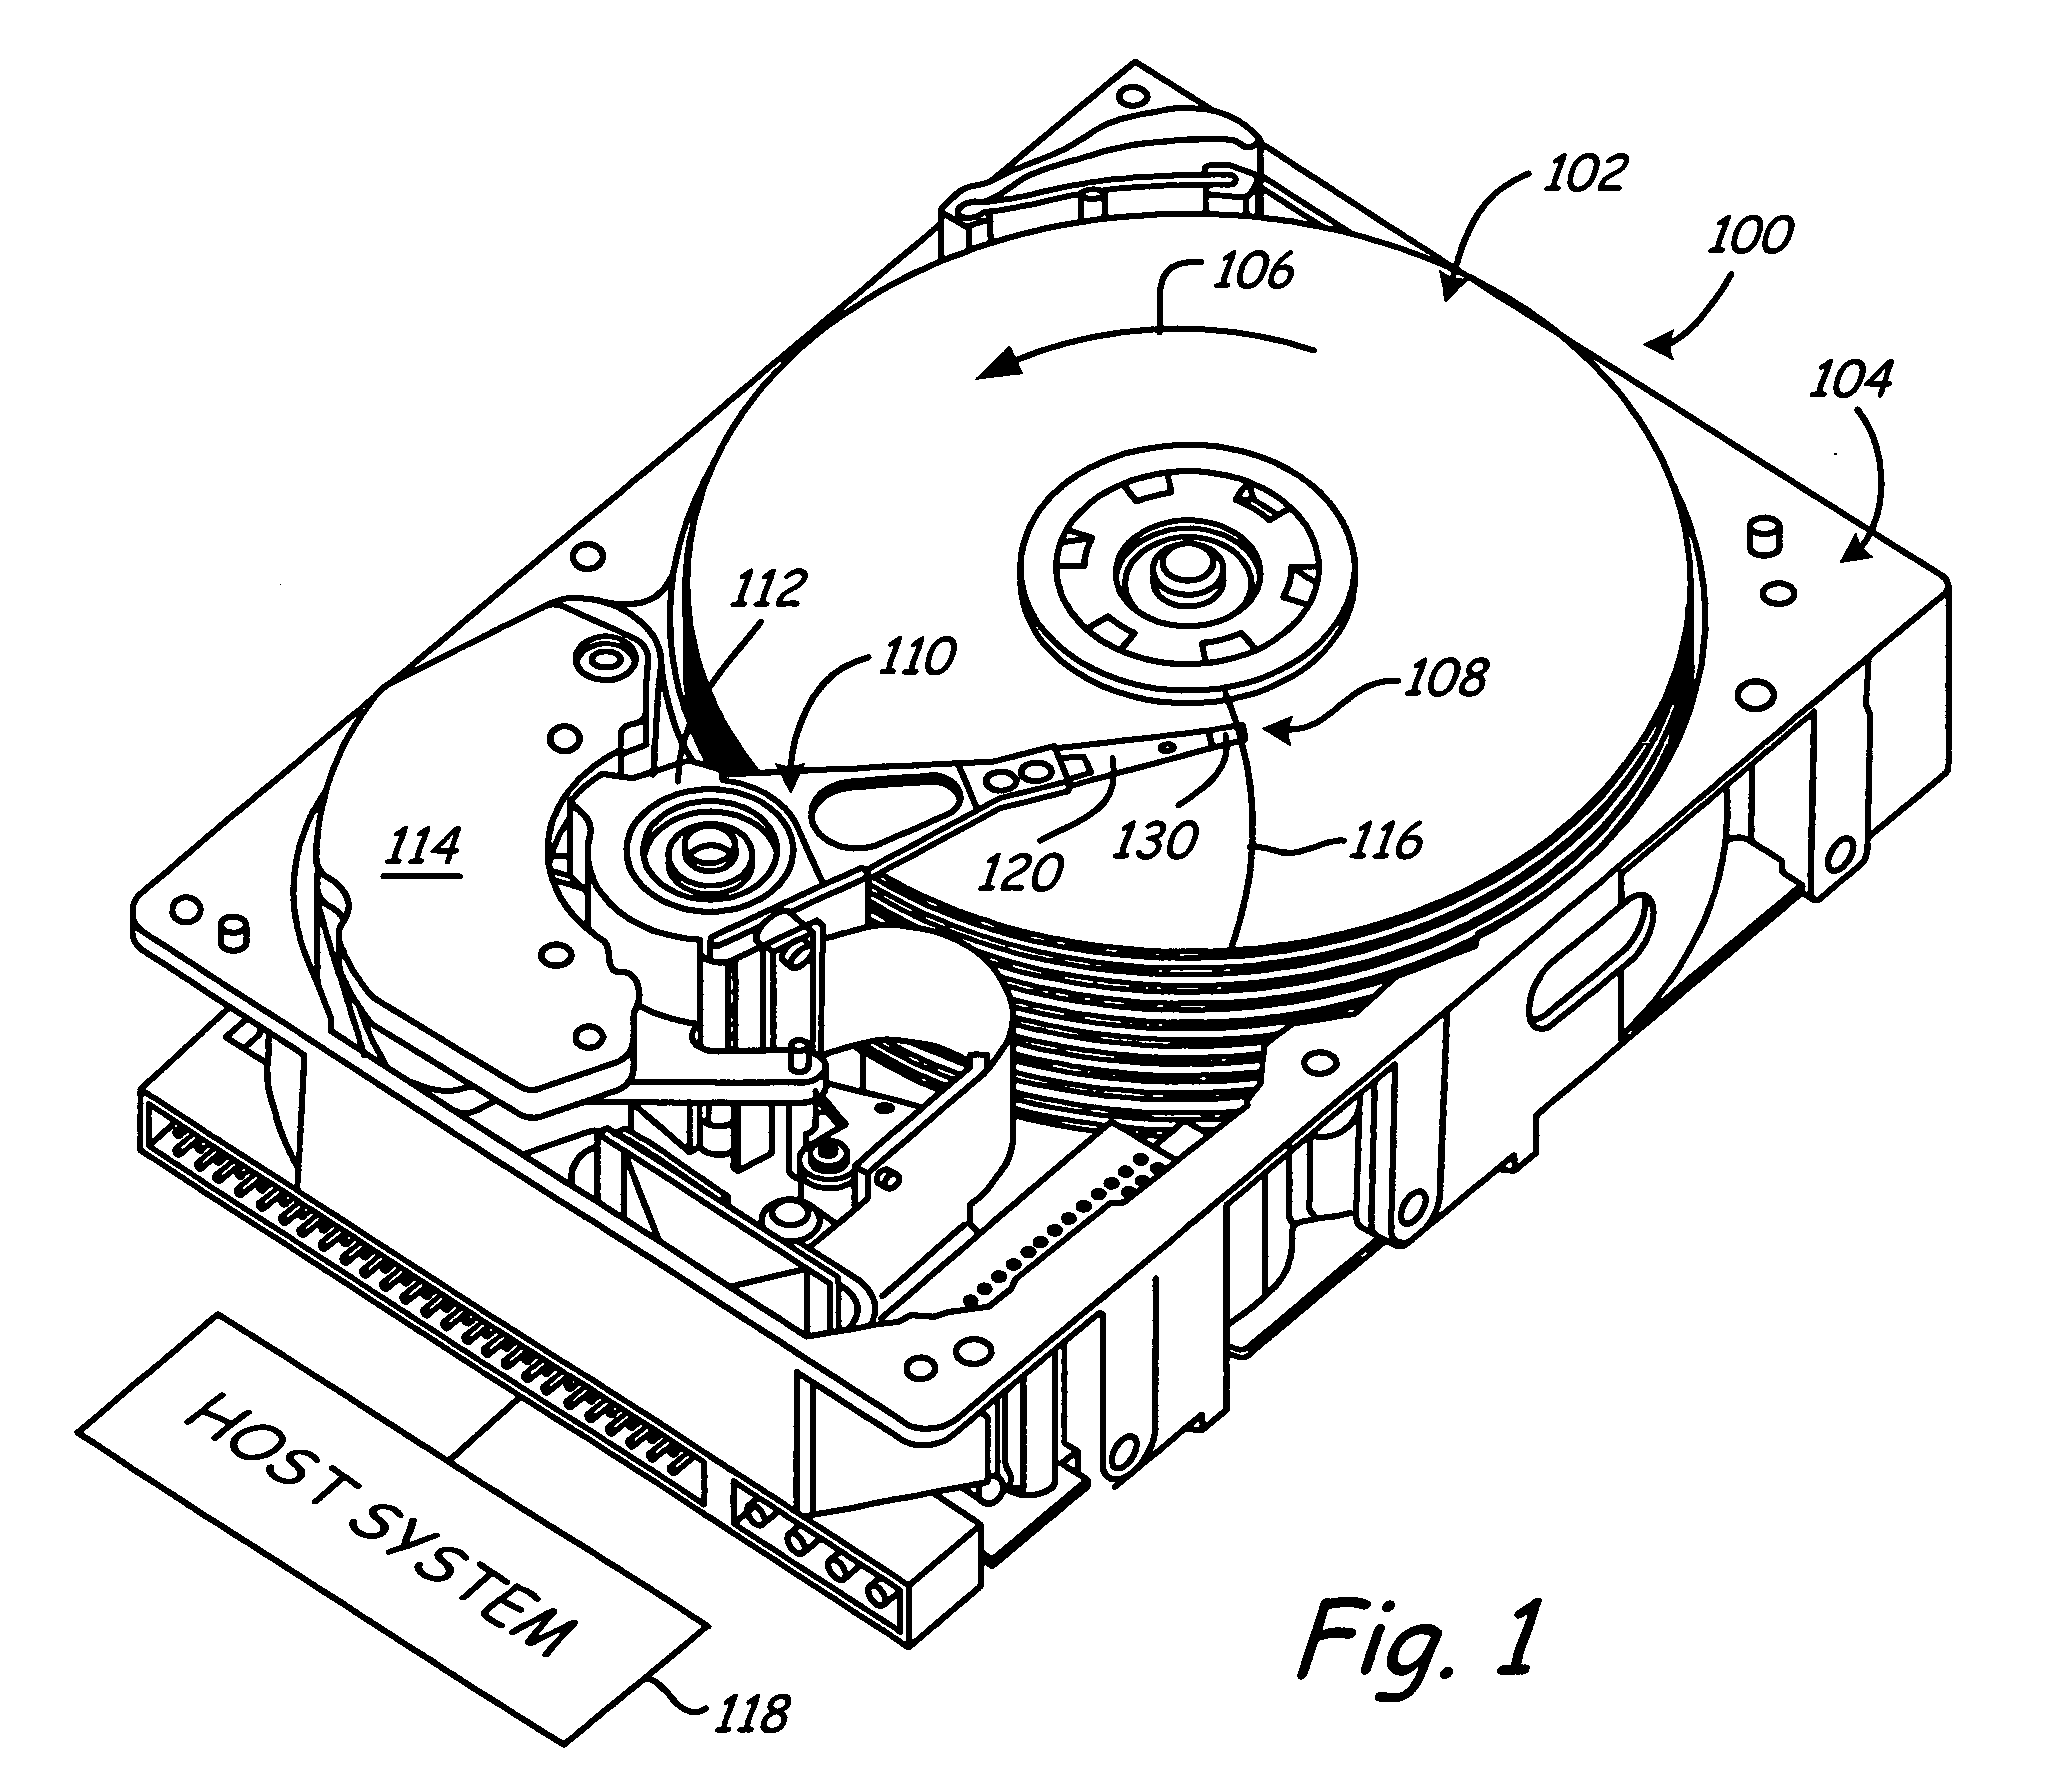 Air bearing slider having a bearing profile contoured for pressurization proximate to nodal regions of a slider-disc interface